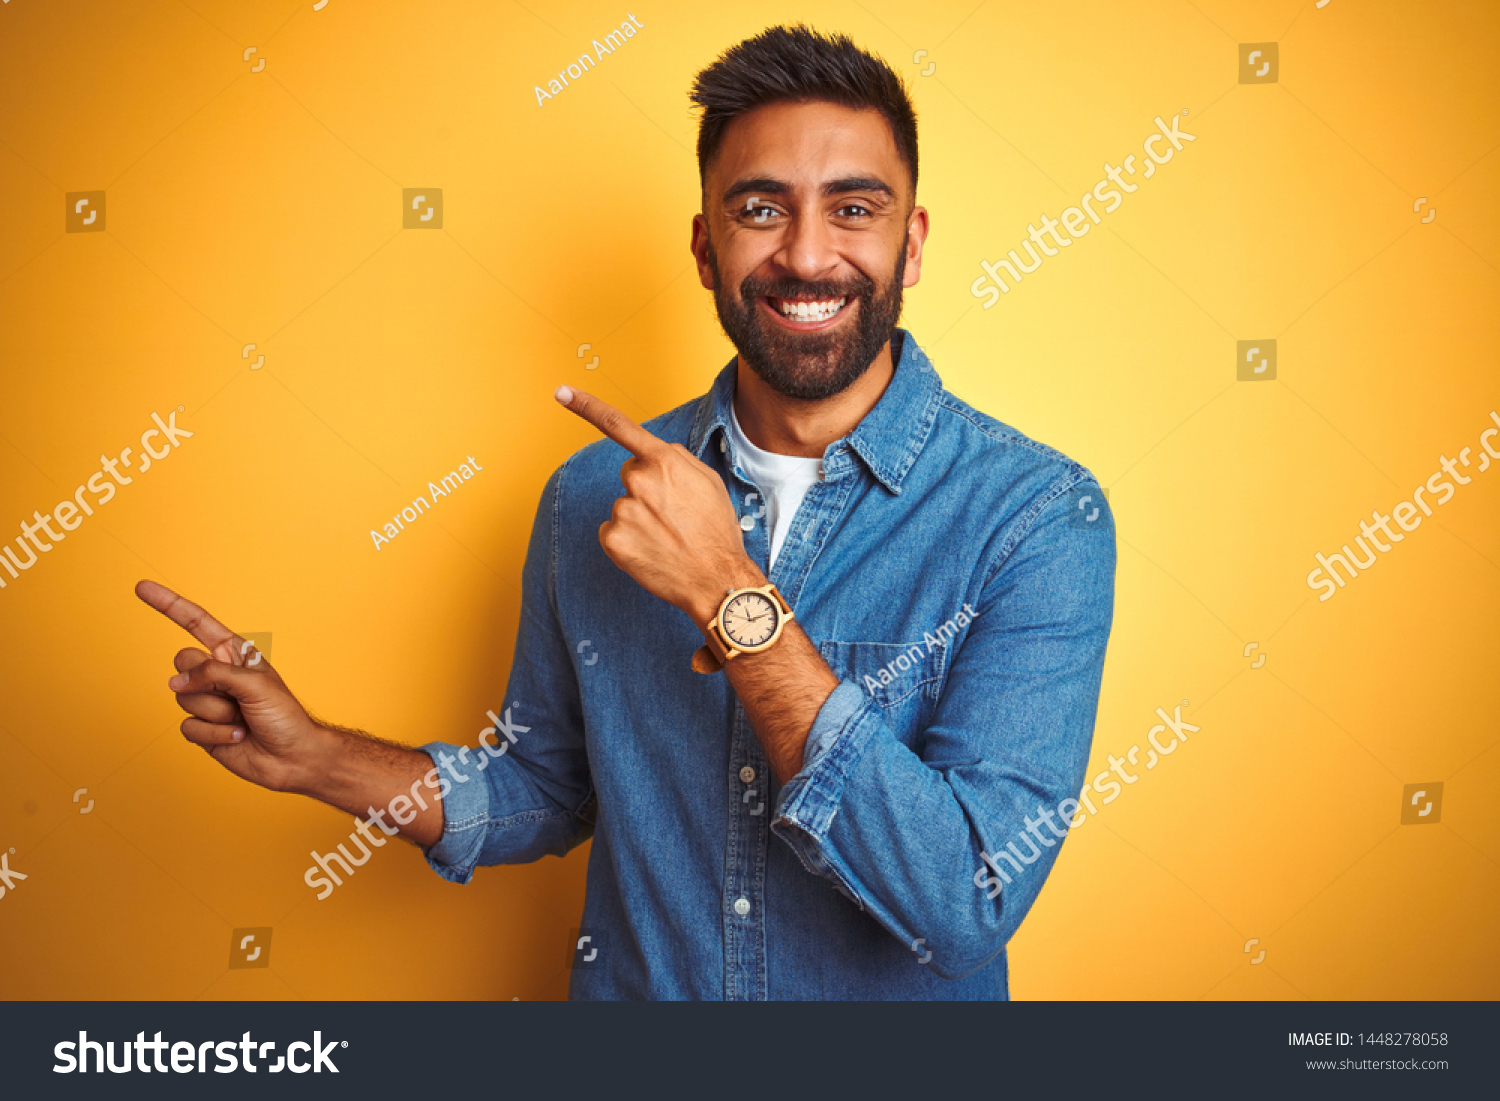 Young indian man wearing denim shirt standing over isolated yellow background smiling and looking at the camera pointing with two hands and fingers to the side. #1448278058